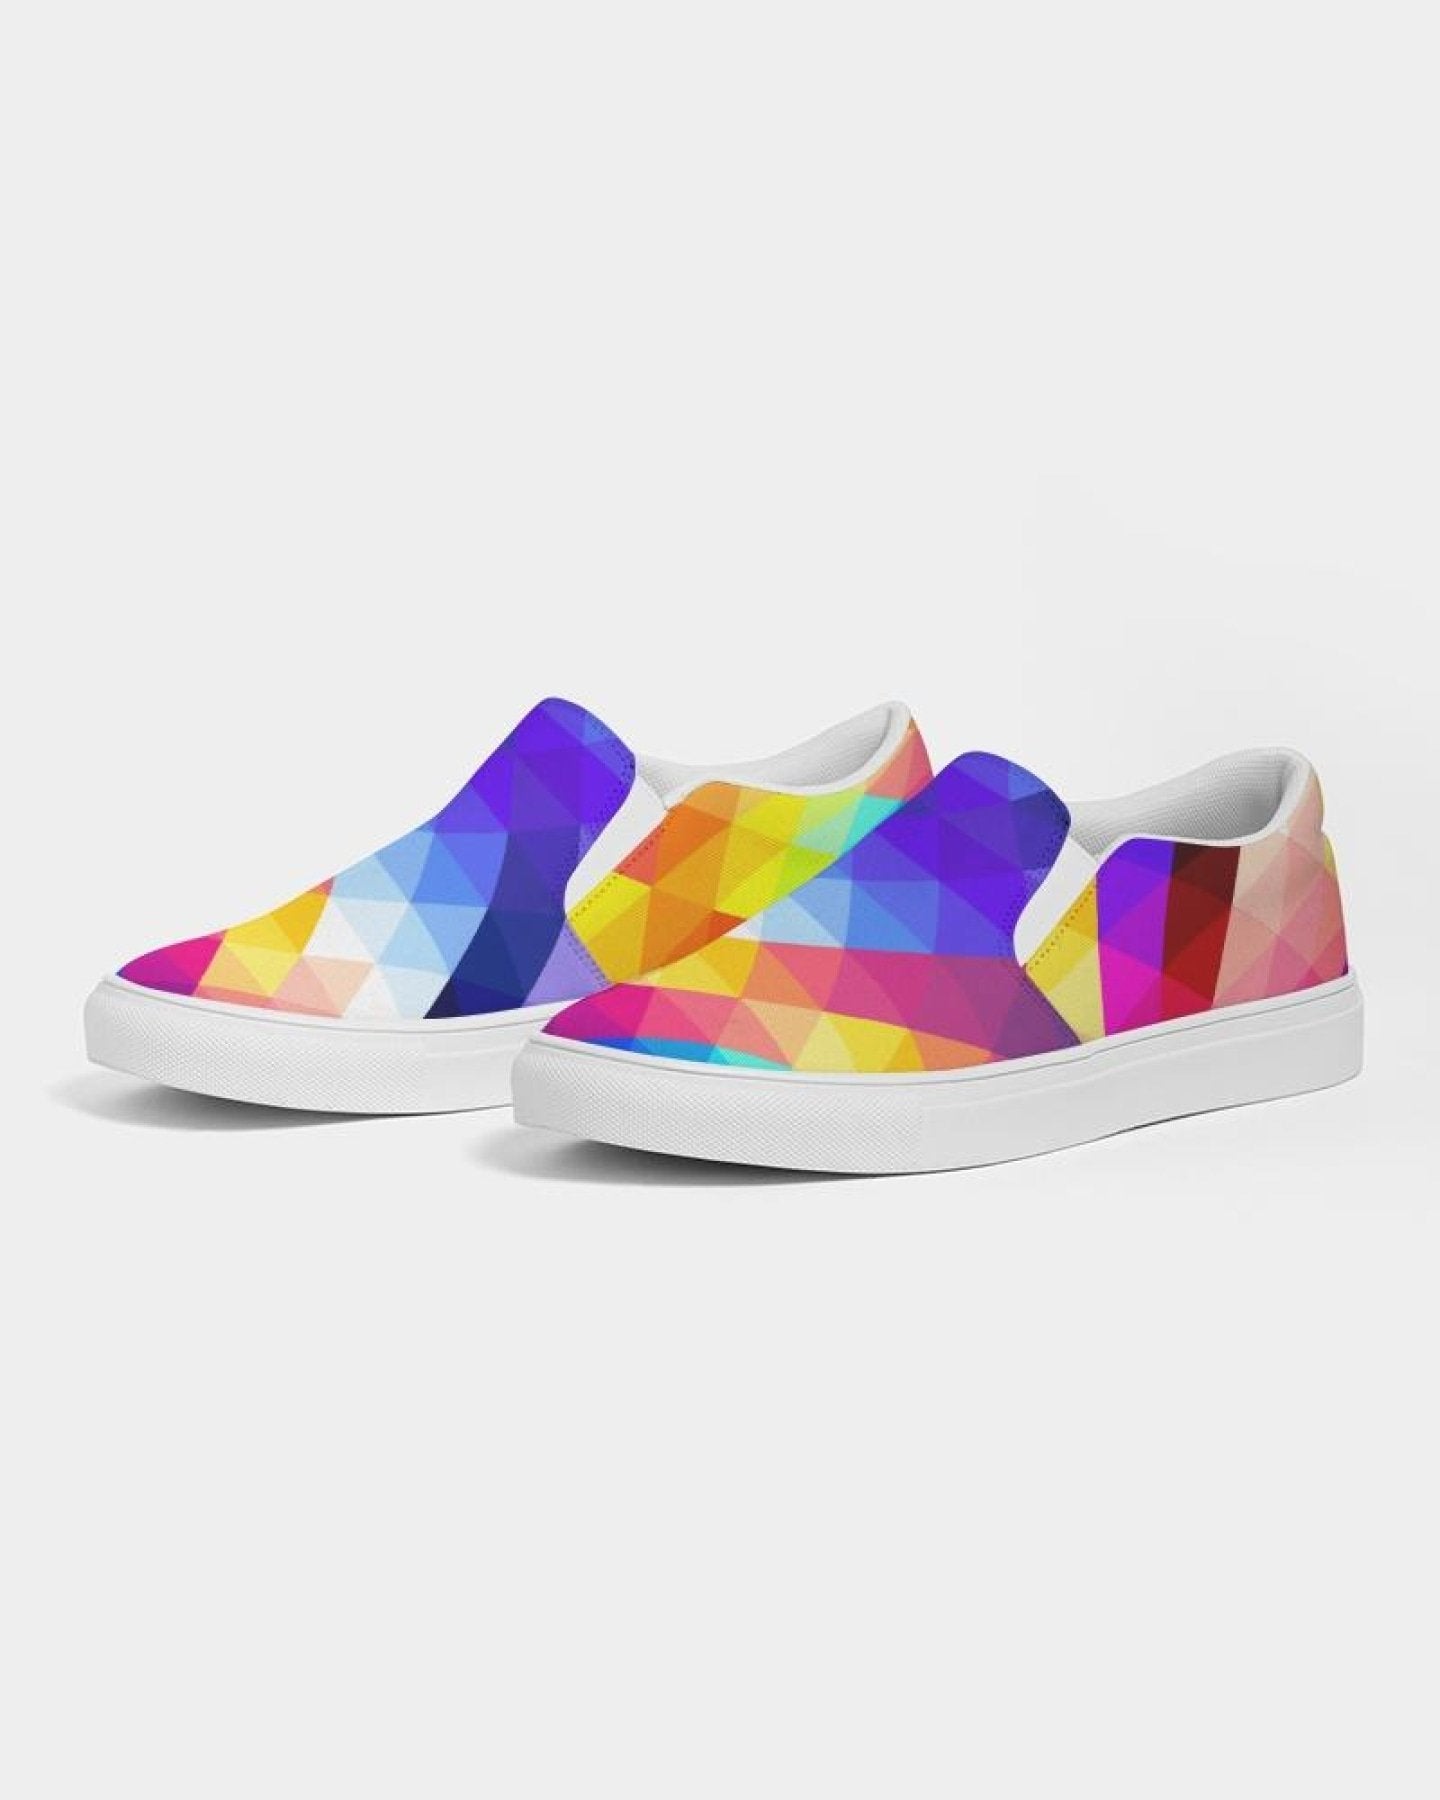 Womens Sneakers - Canvas Slip On Shoes, Multicolor Retro Print